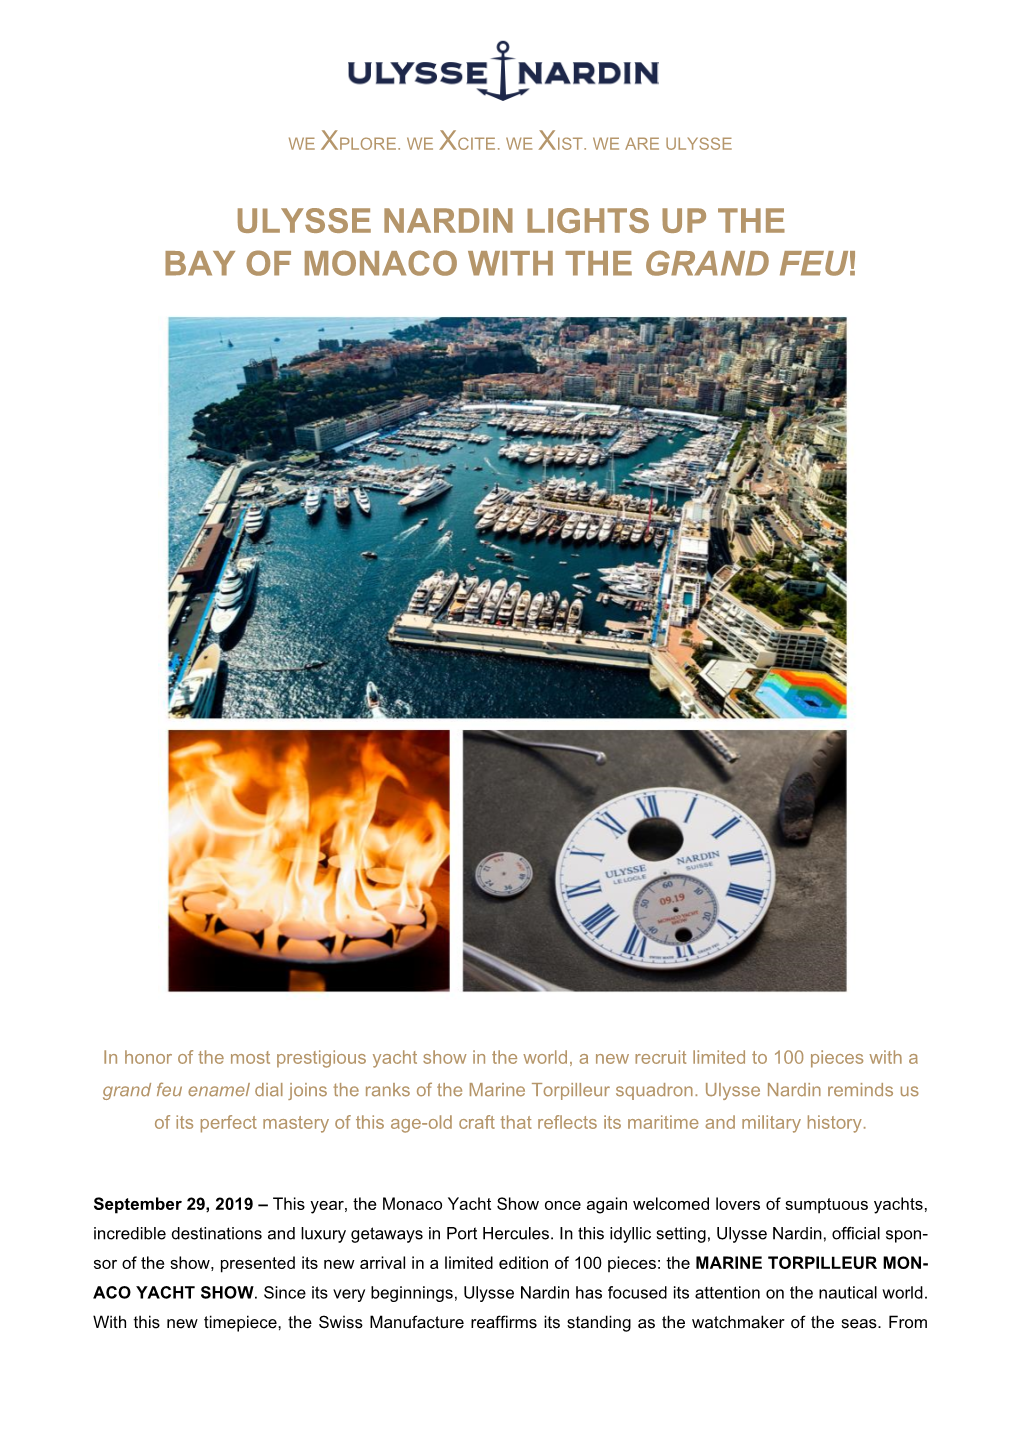 Ulysse Nardin Lights up the Bay of Monaco with the Grand Feu!